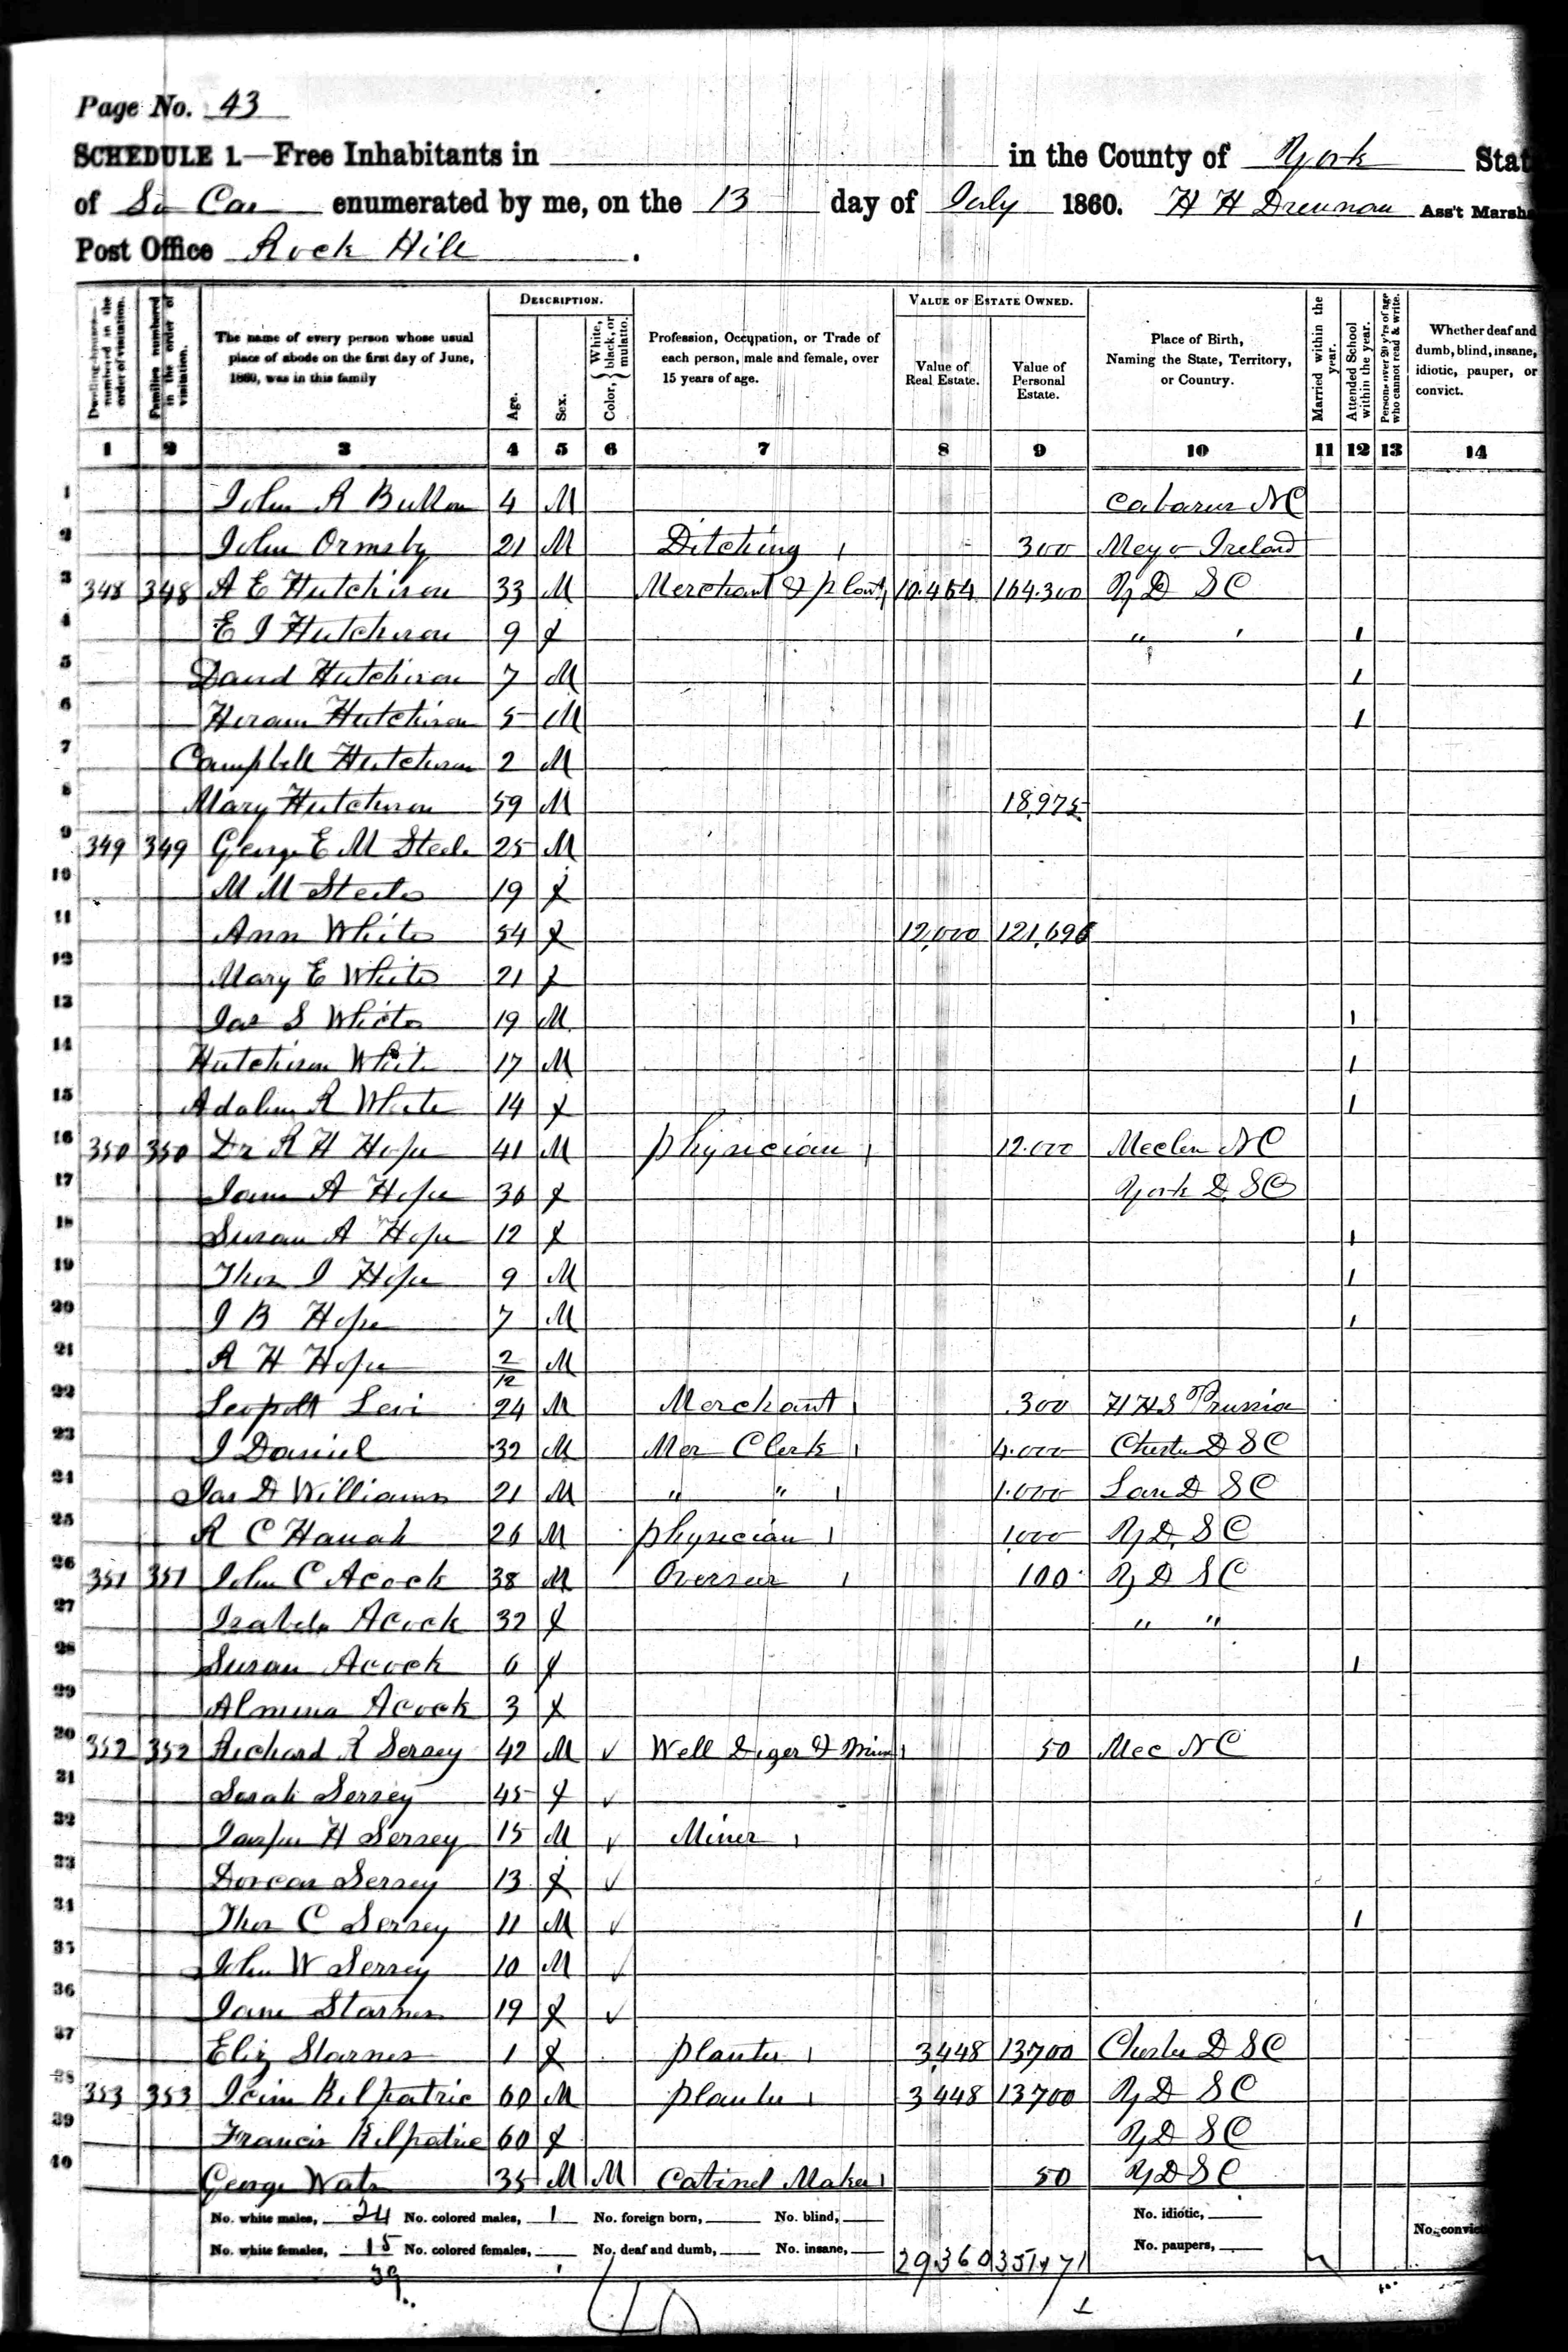 1860 Federal Census - P.1 (Geo. and Jimmy Watts)